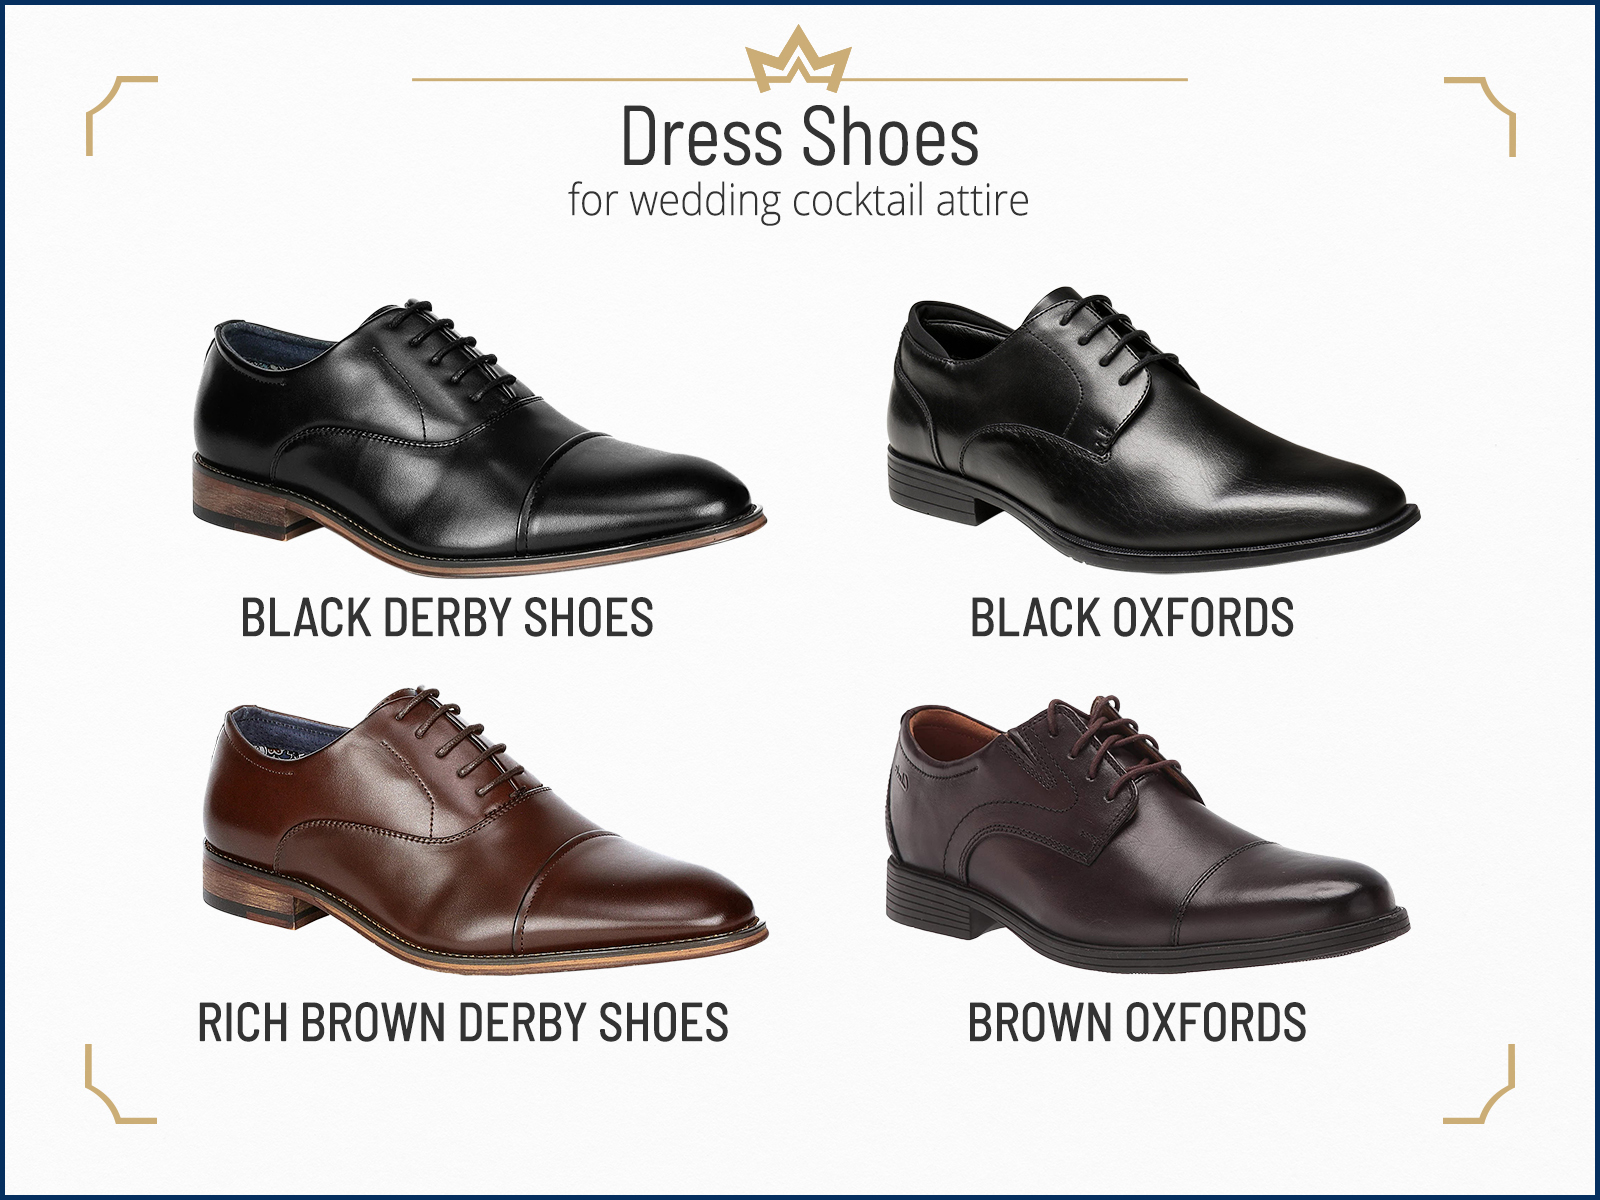 Recommended dress shoes for wedding cocktail attire